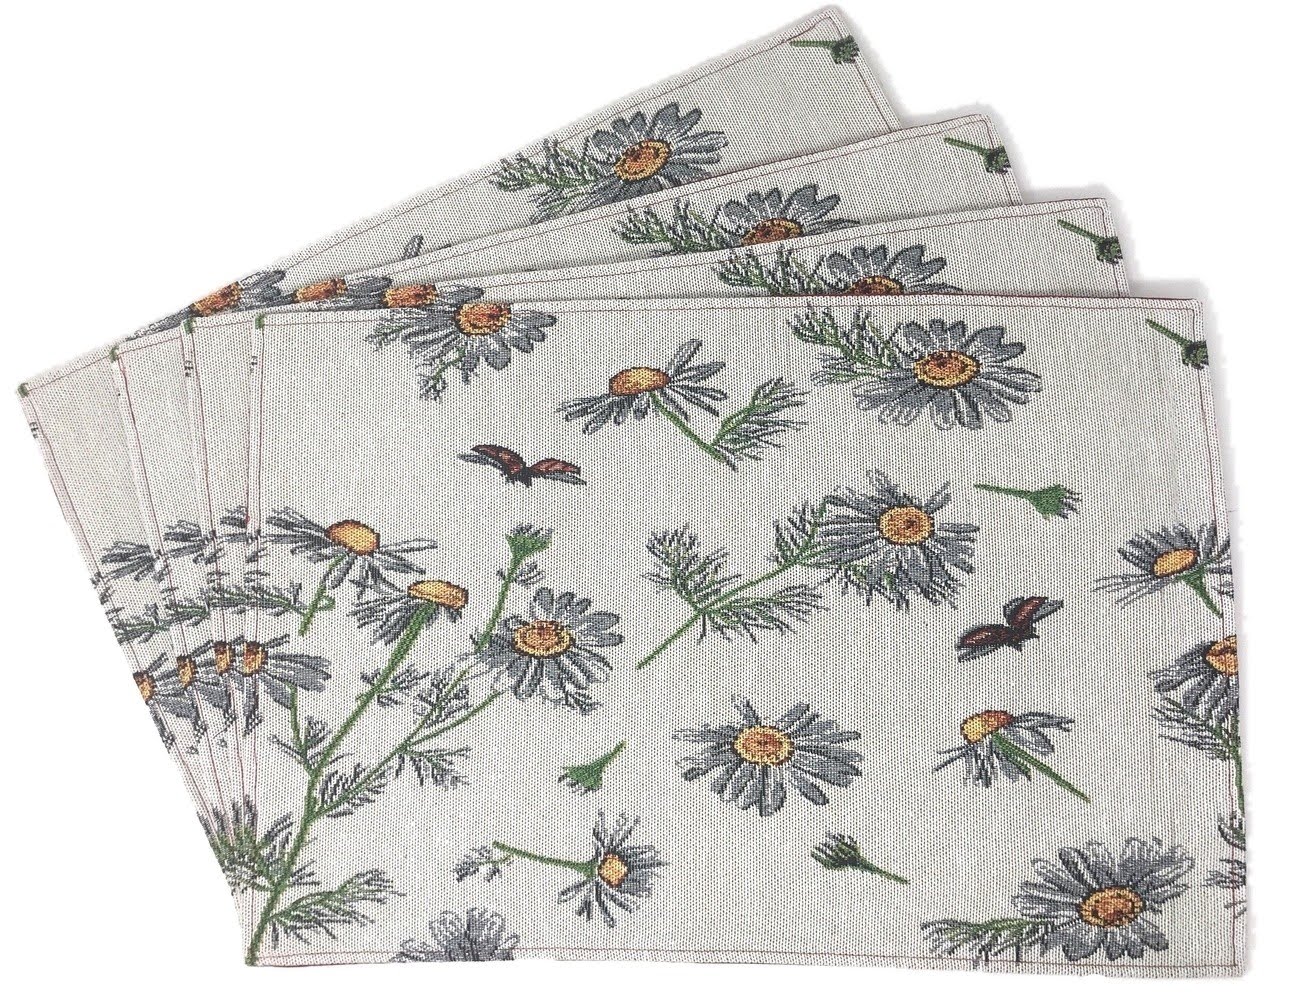 Tache Floral Daisies Ladybugs Woven Tapestry Placemat Set (18114) - Tache Home Fashion